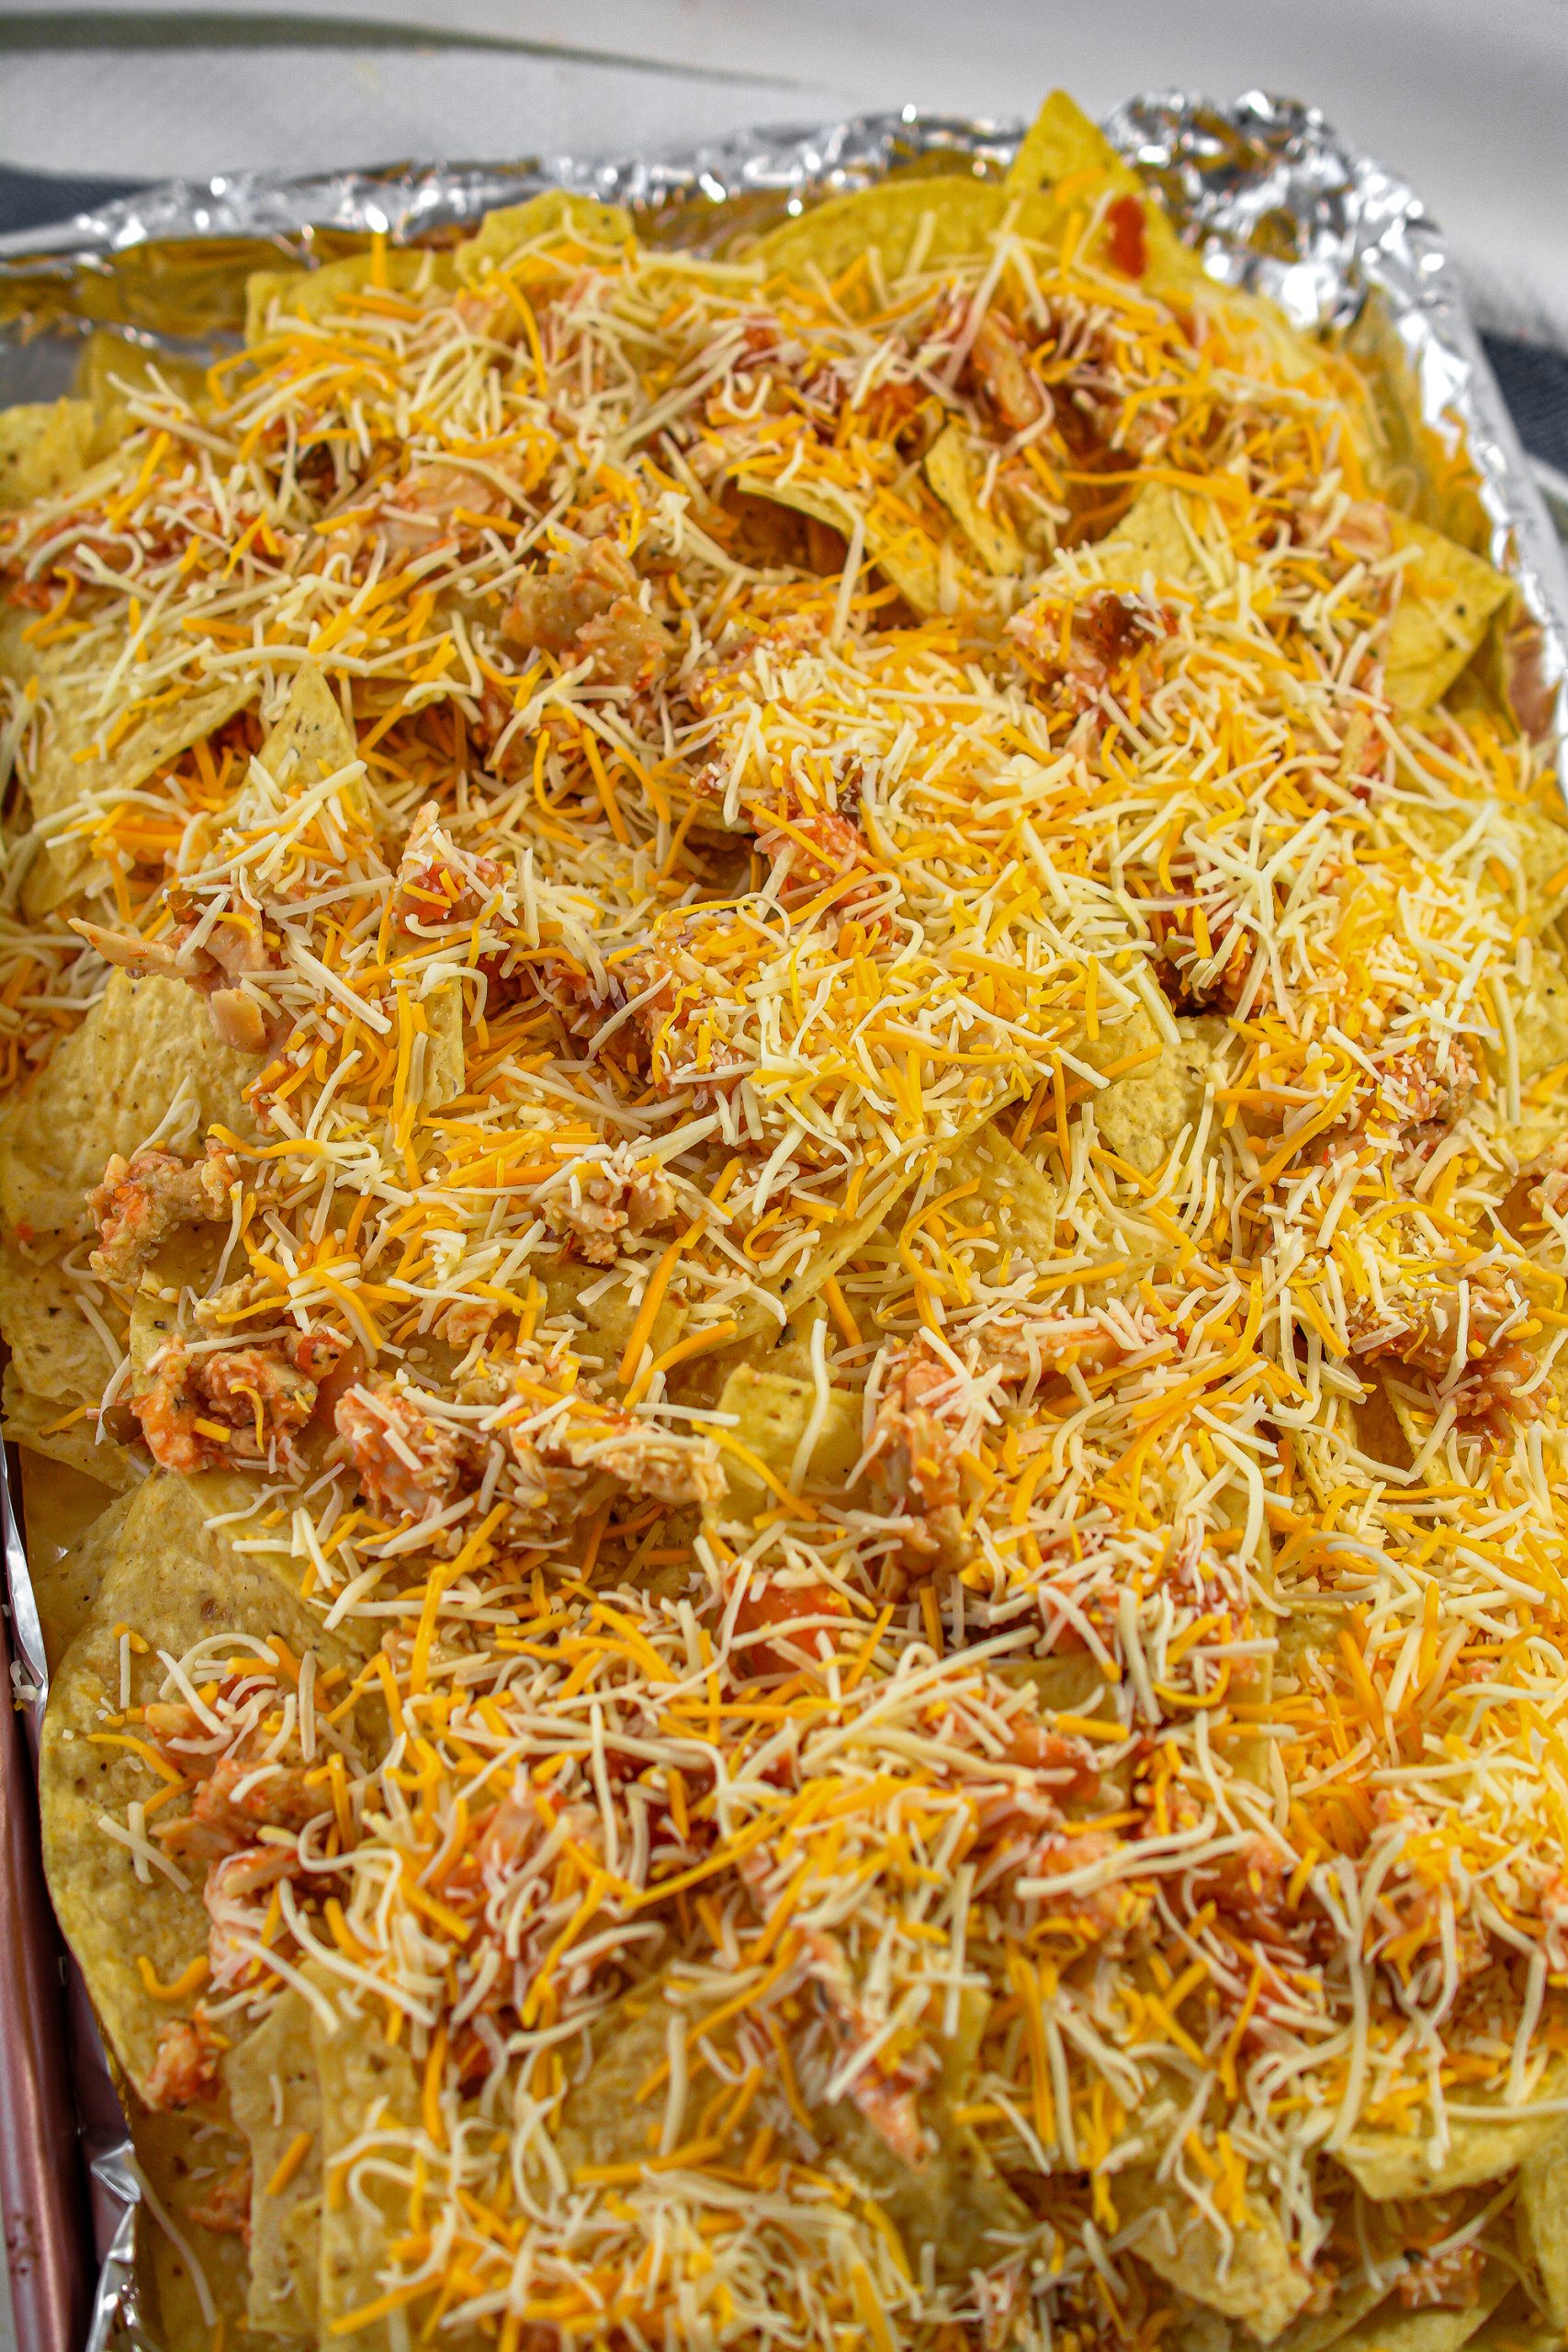 Add another layer of chips on top of the first one, and then top with the remaining chicken and cheese as well as the black beans.